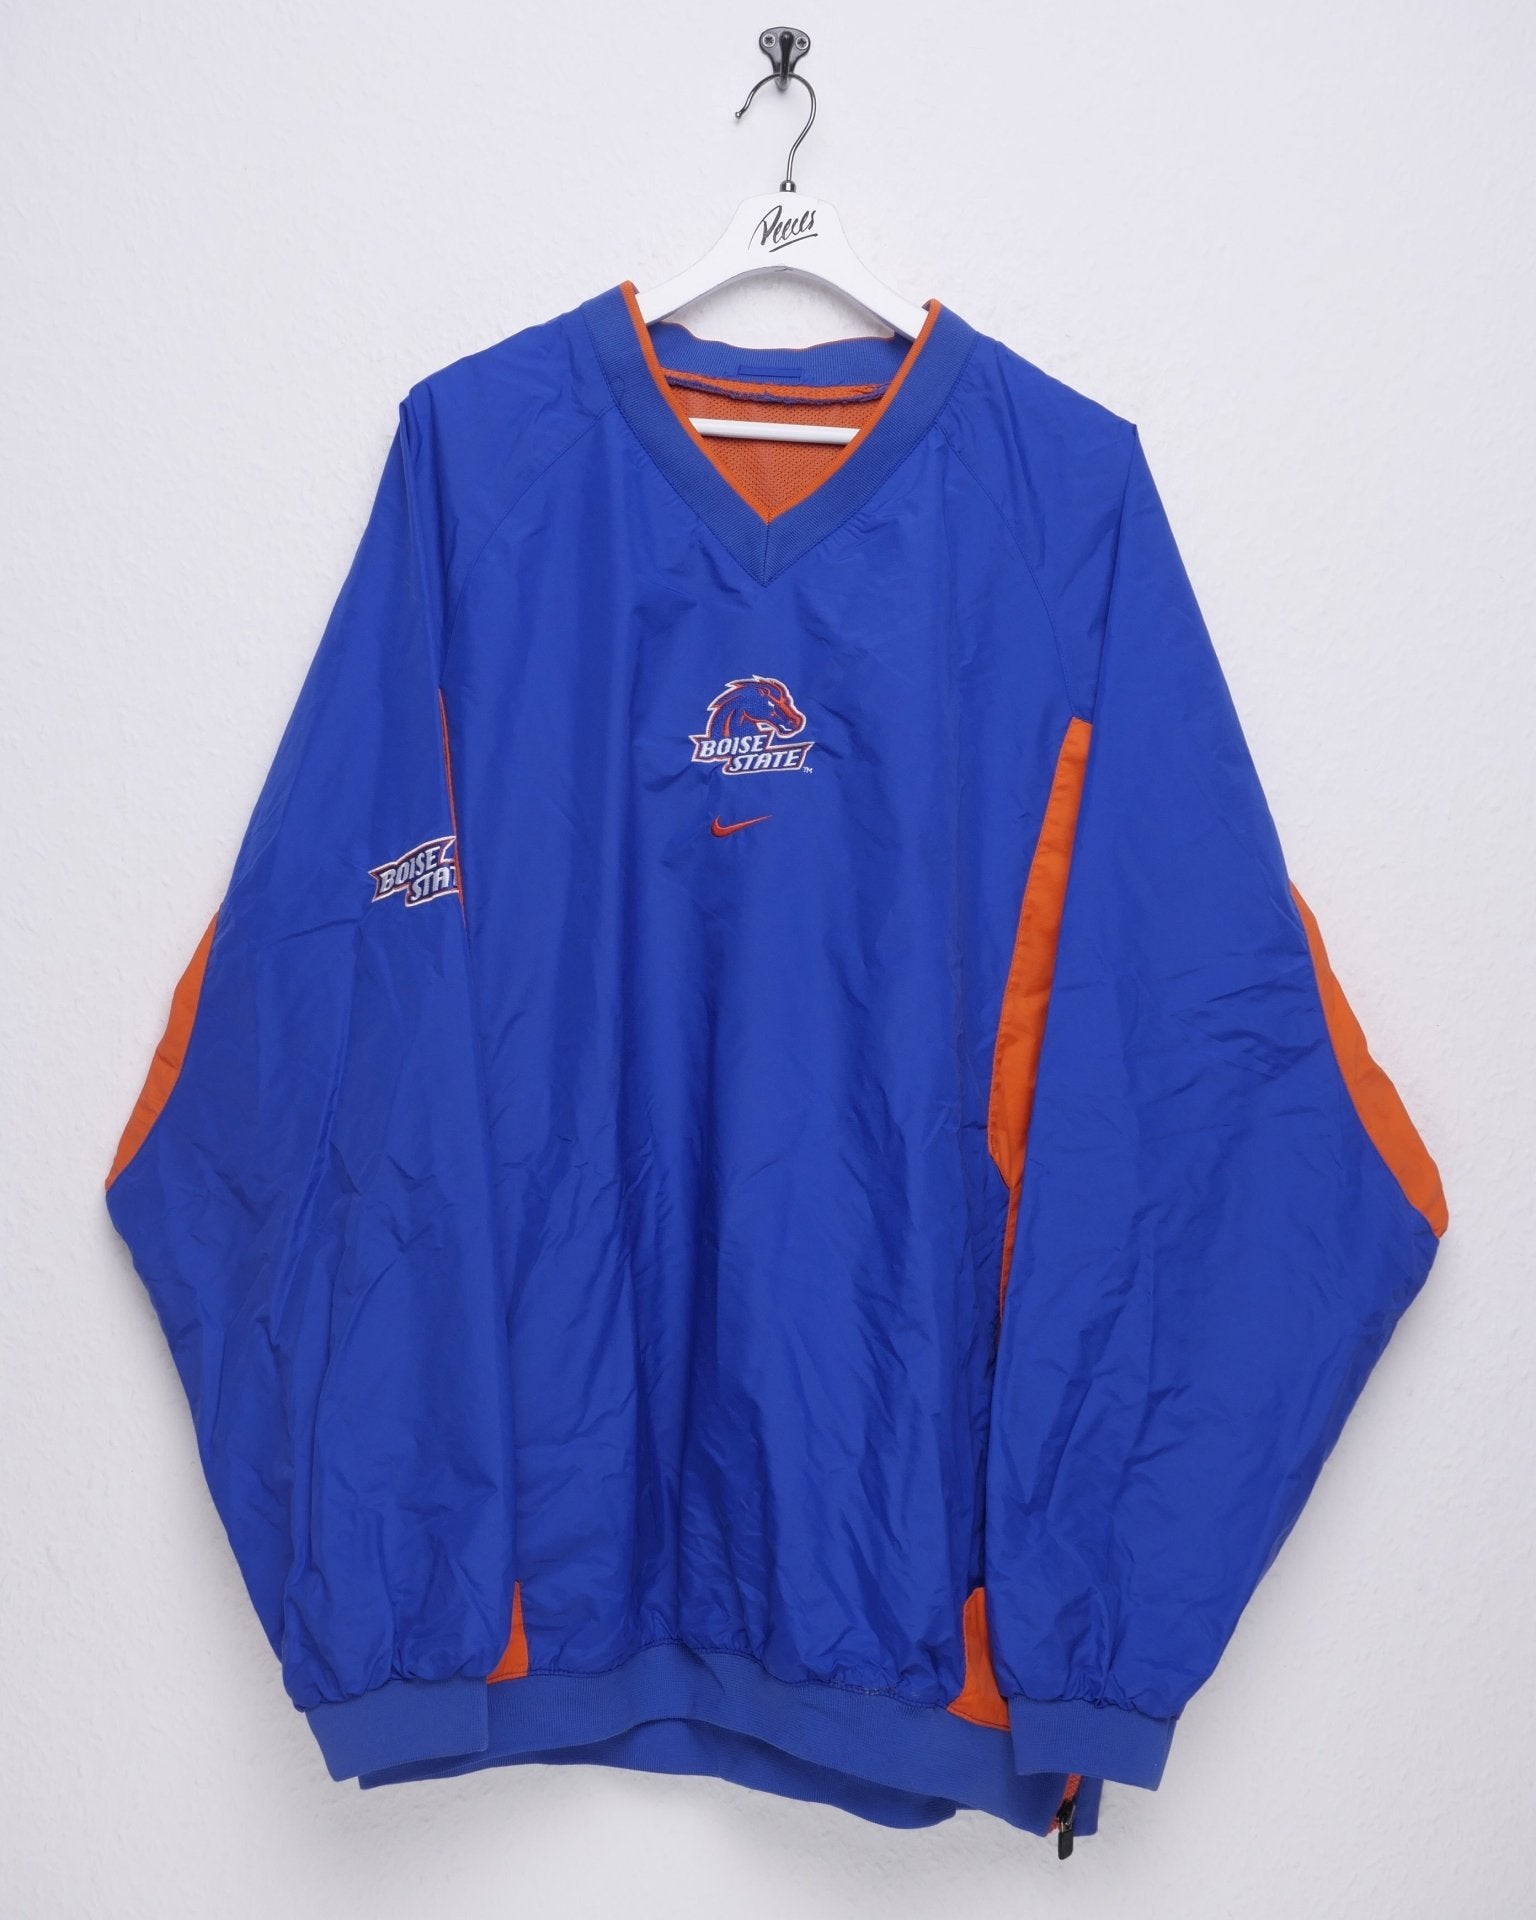 Nike Boise State Broncos Football embroidered Middle Swoosh Jersey Sweater - Peeces